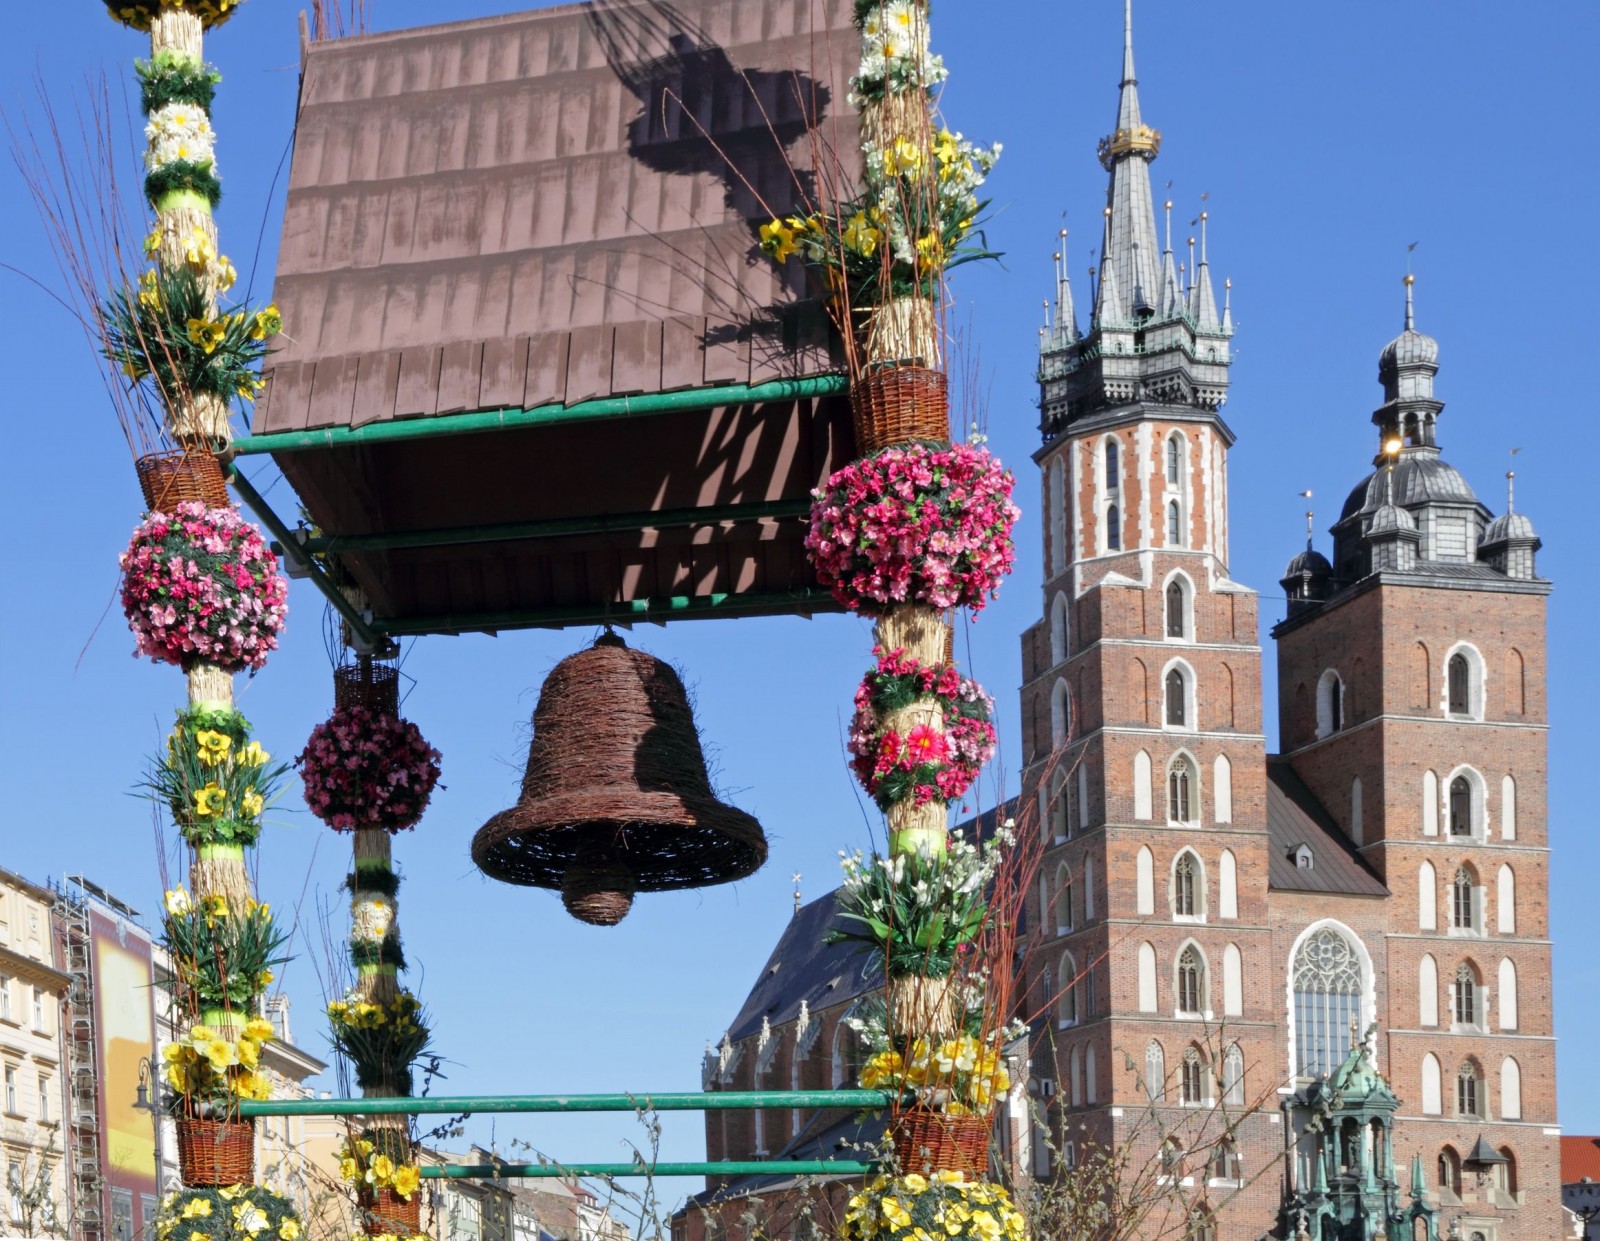 traditional-easter-decorations-on-main-square-cracow-malopolska-poland-europe-1600x1241